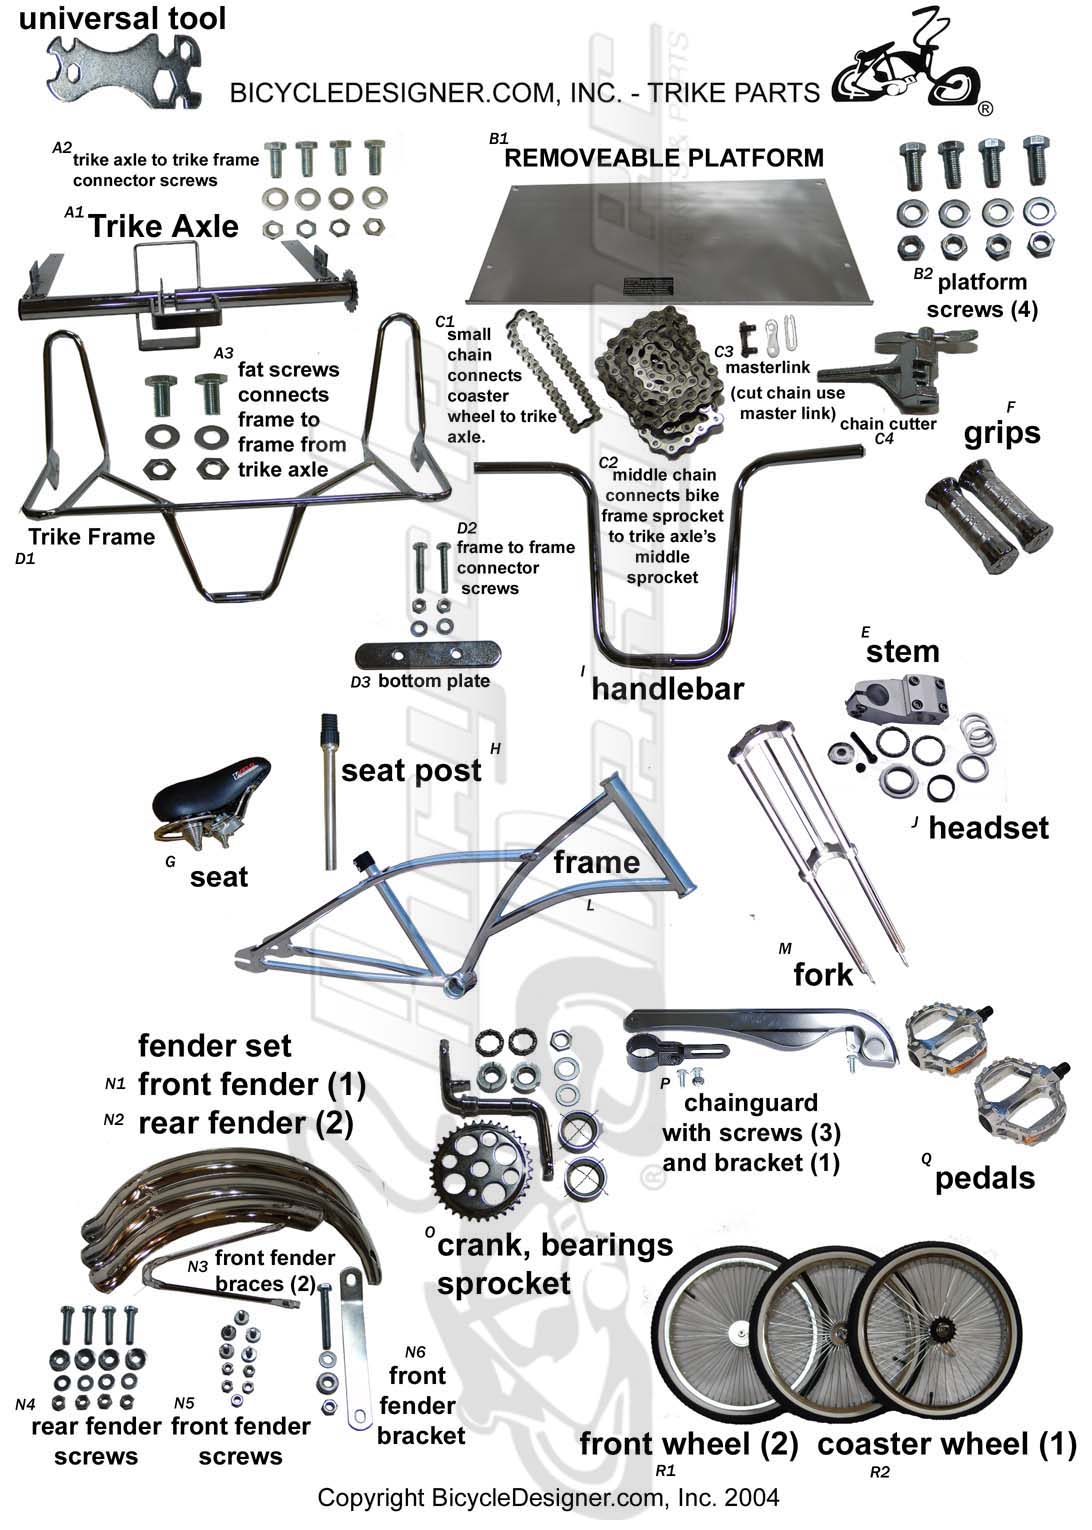 Download this Trike Parts And... picture